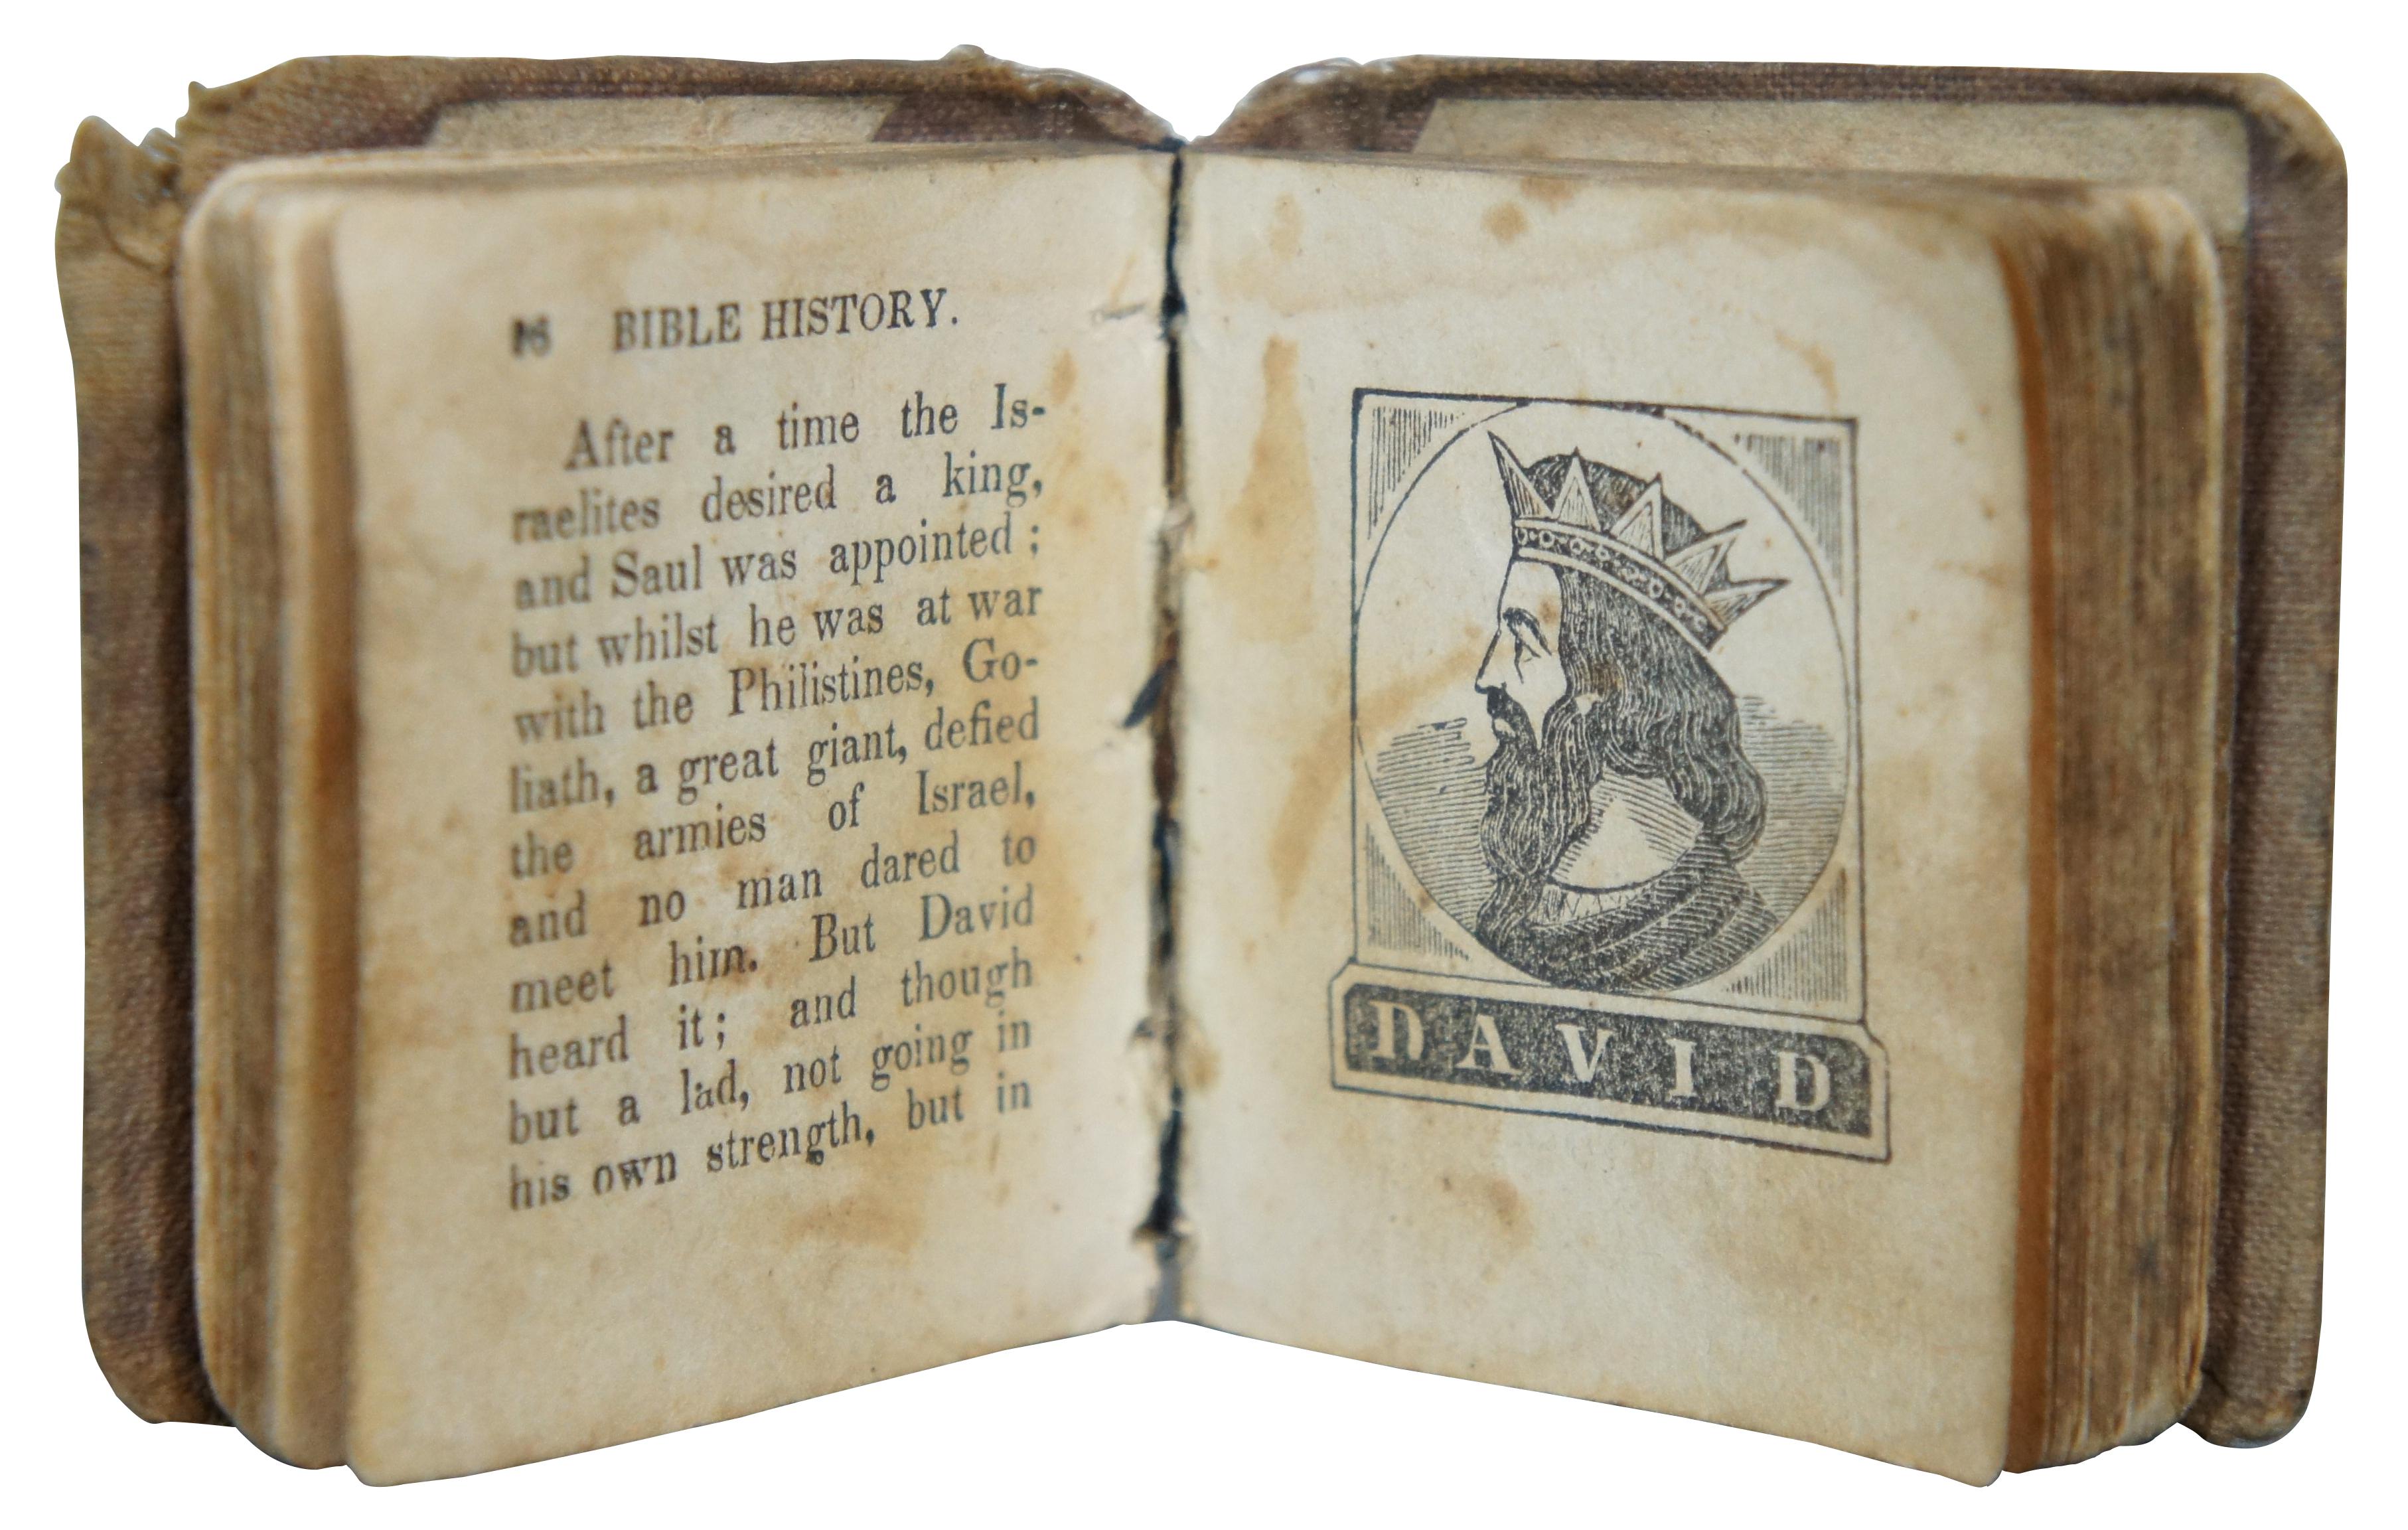 Antique miniature hard back, cloth cover book of Bible History, circa 1820s-1830s.